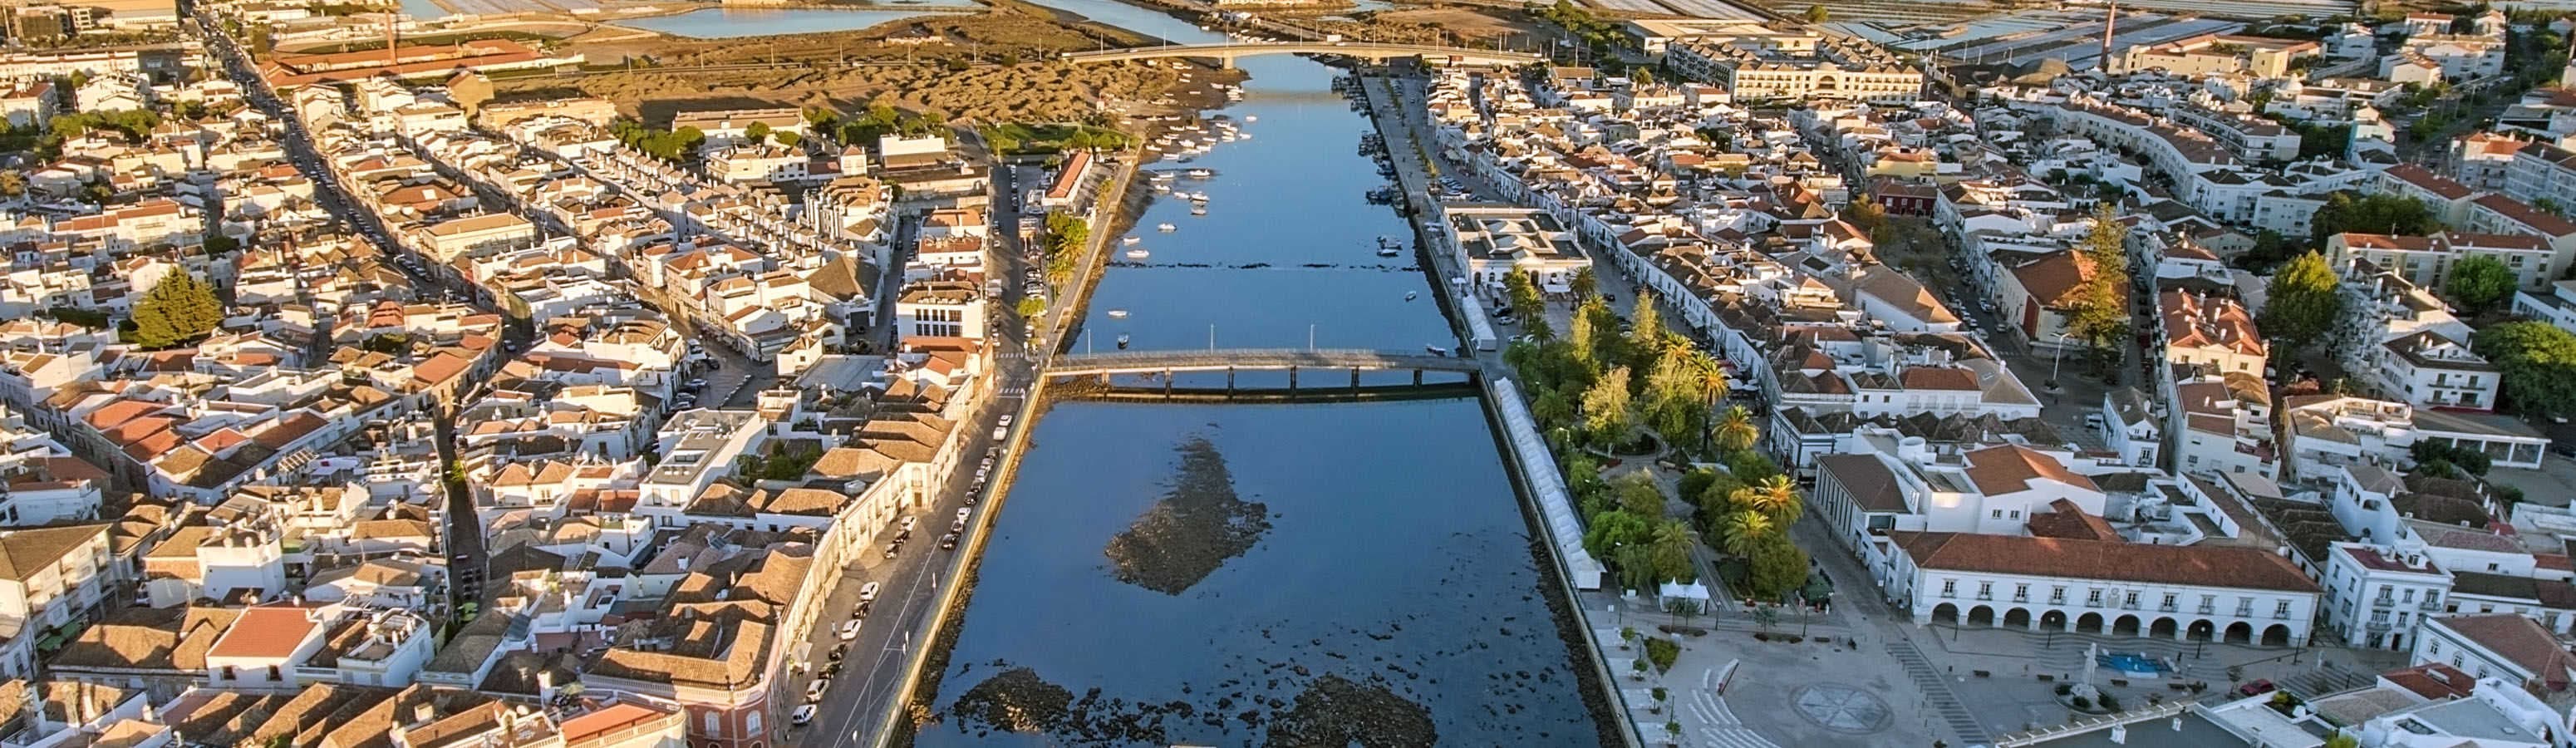 Tavira, the perfect holiday not only for history lovers!